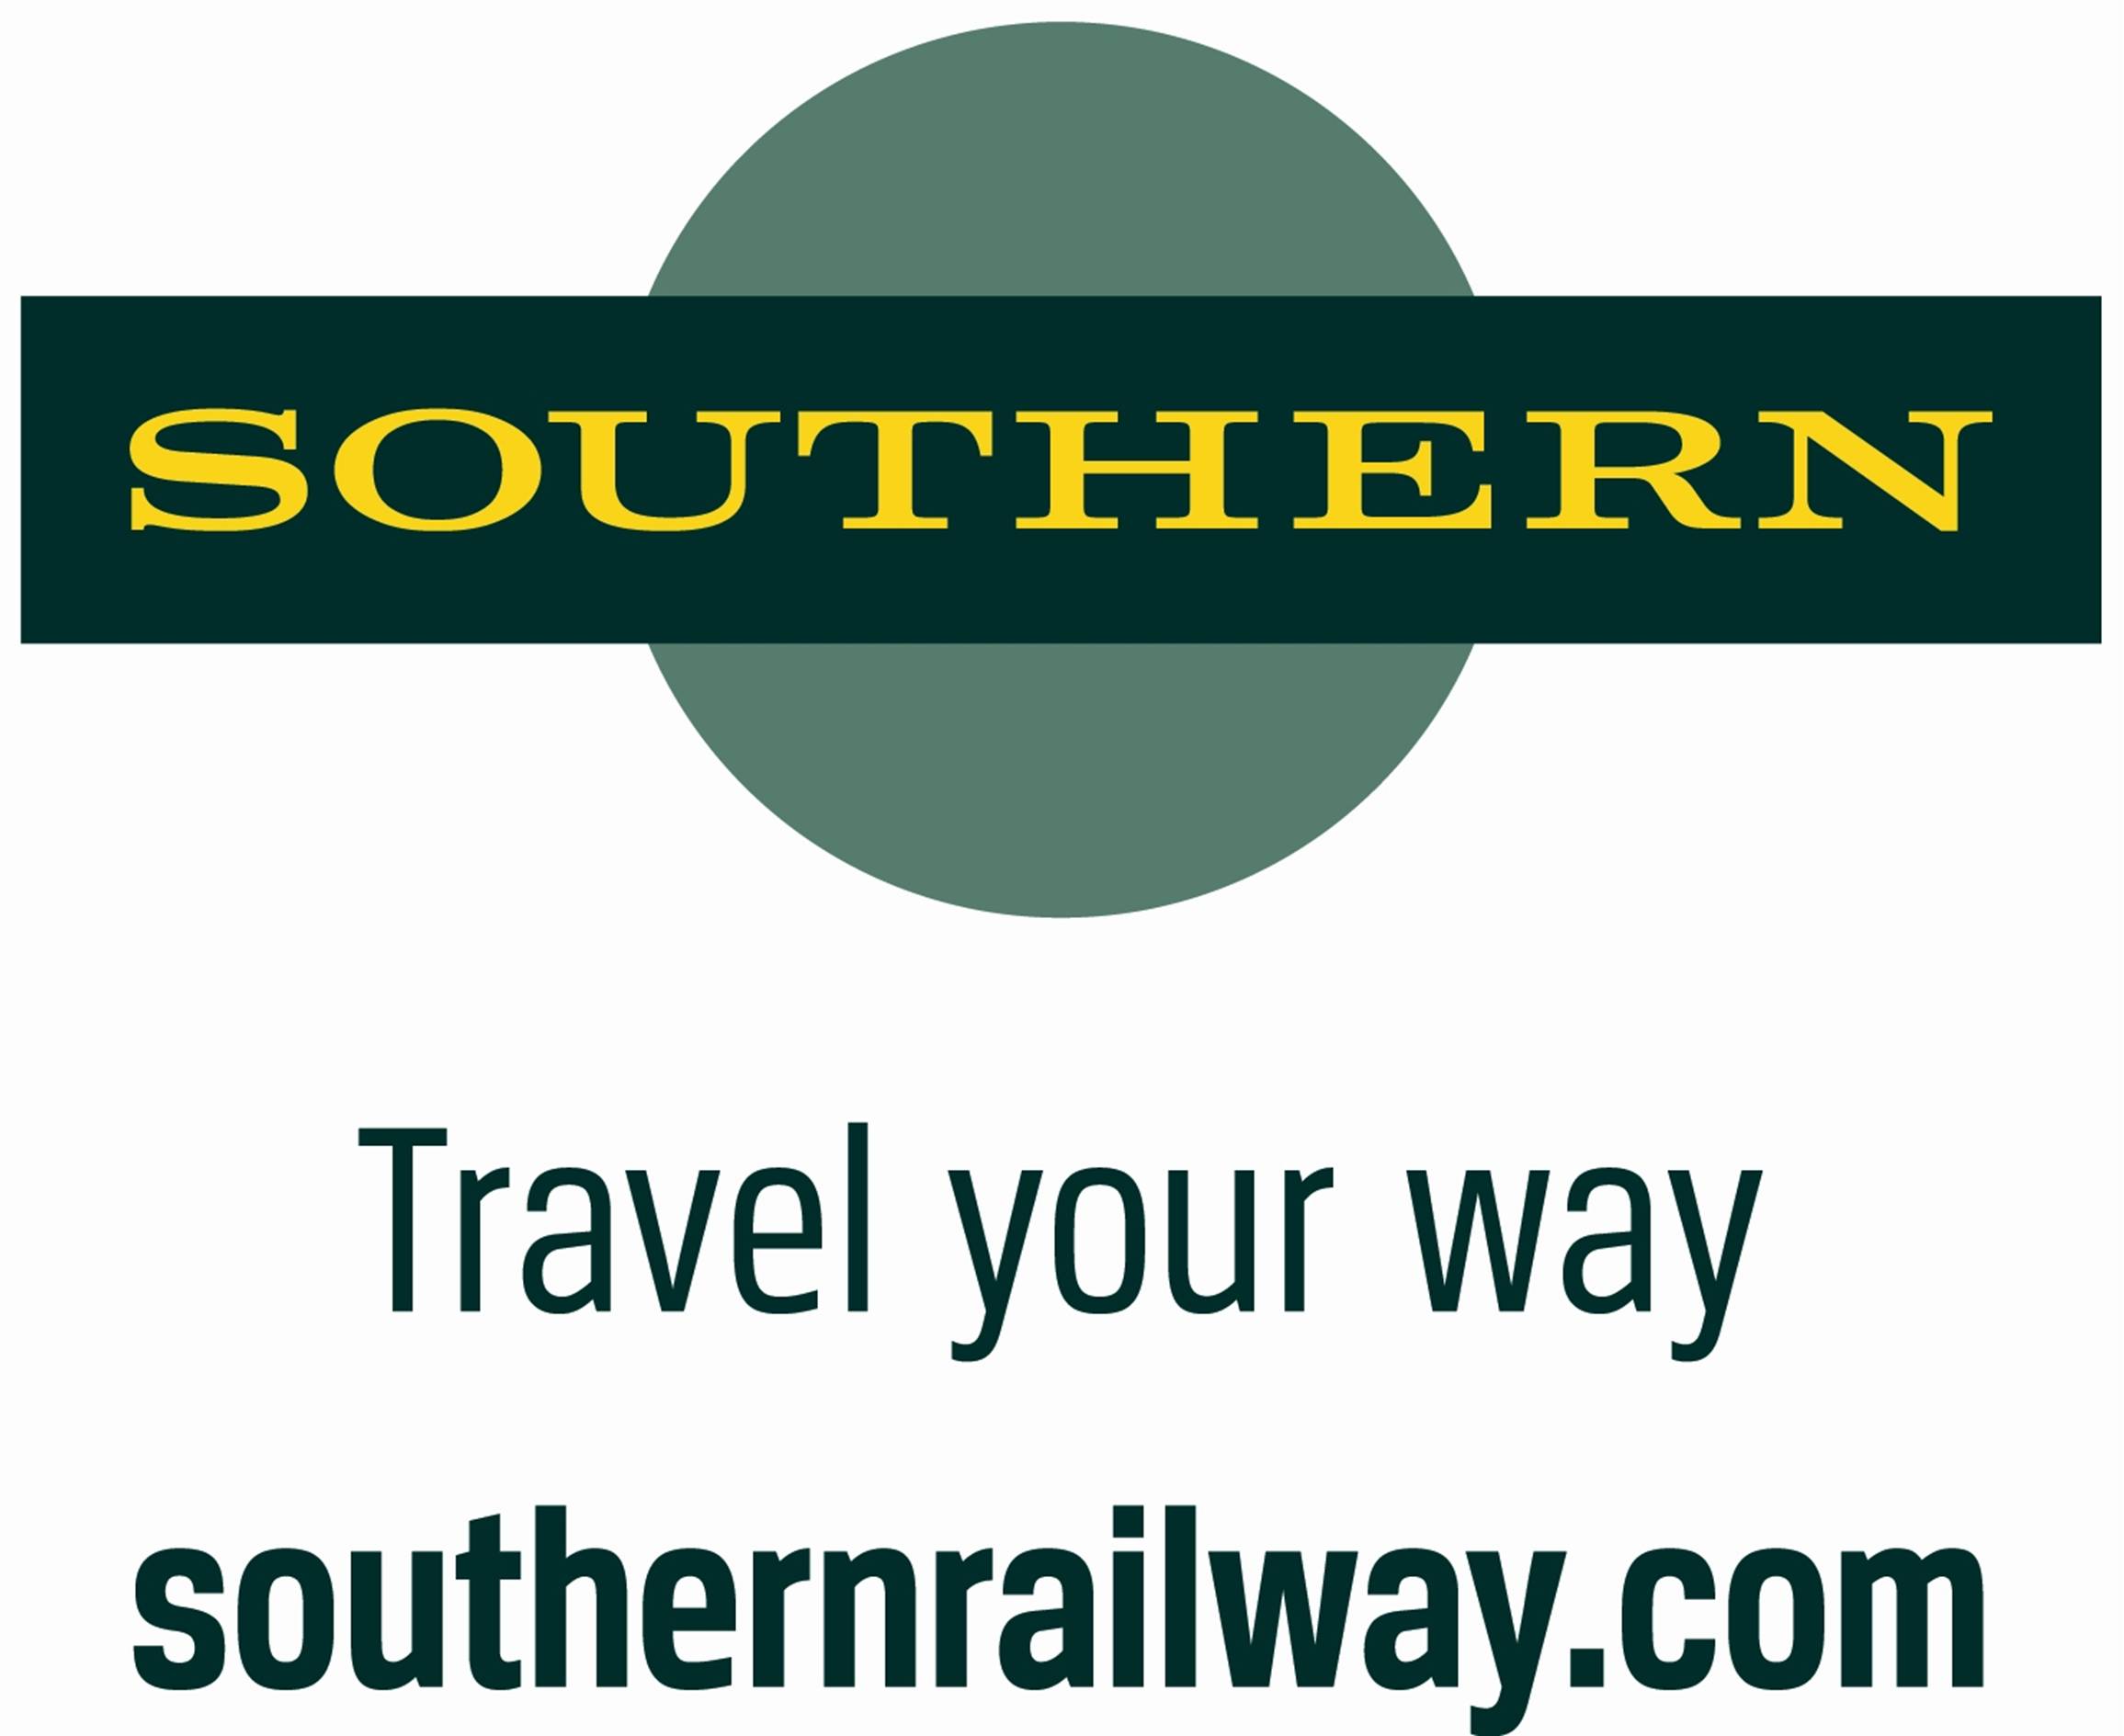 Southern Railway Logo - Changes to UNIZONE tickets. Student Advice Service